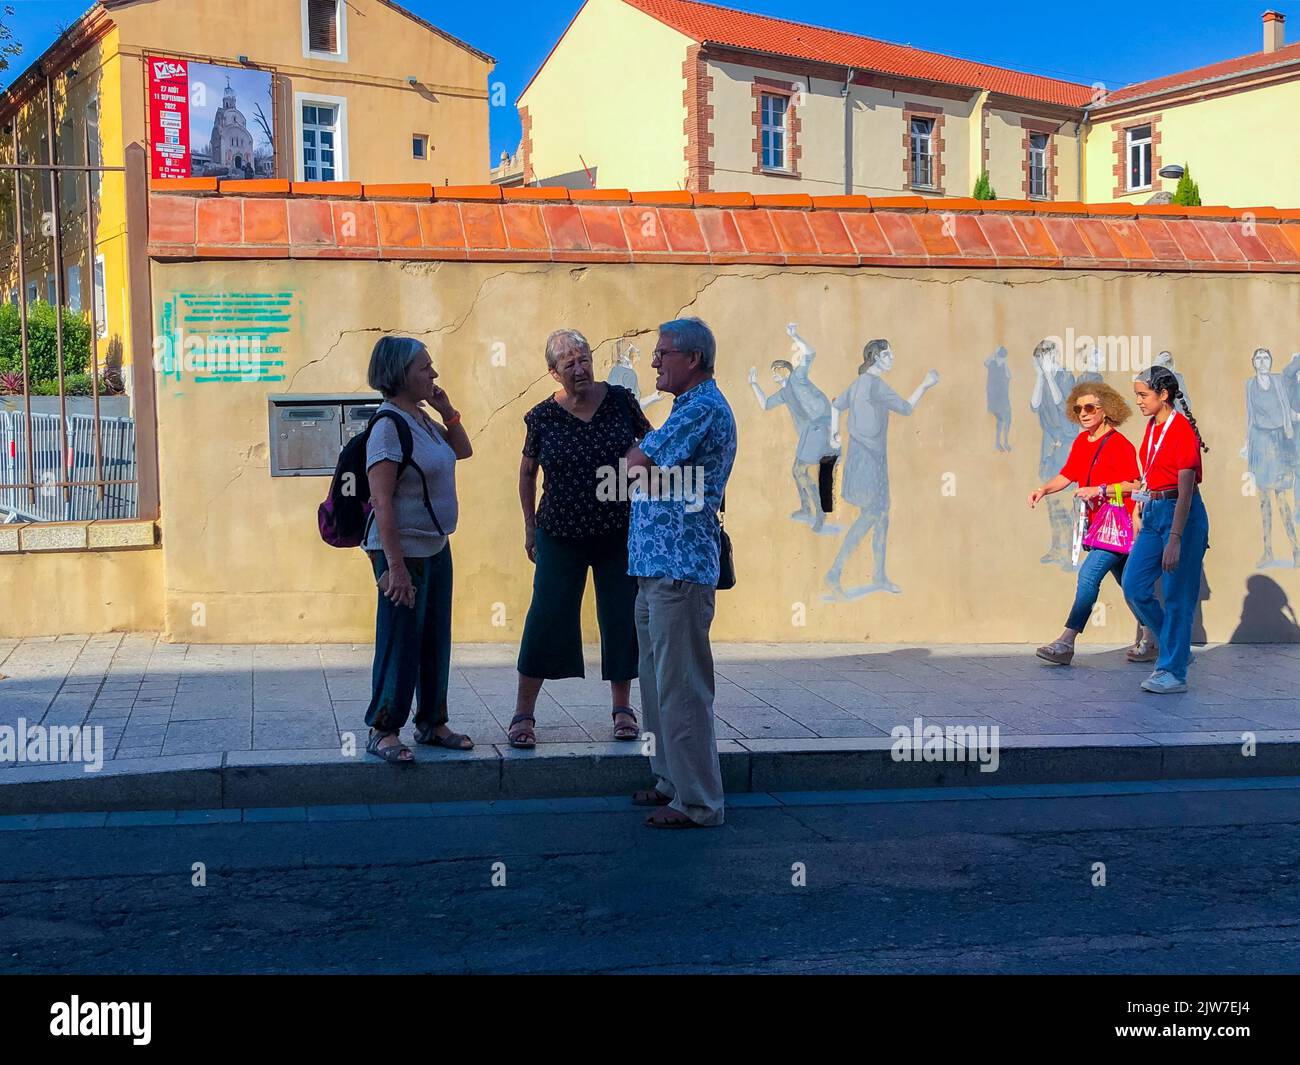 Perpignan, France, Street Scenes, Group Tourists Talking in front of Street Art Wall (Anti-COVID-19 Vaccination Sign) Stock Photo